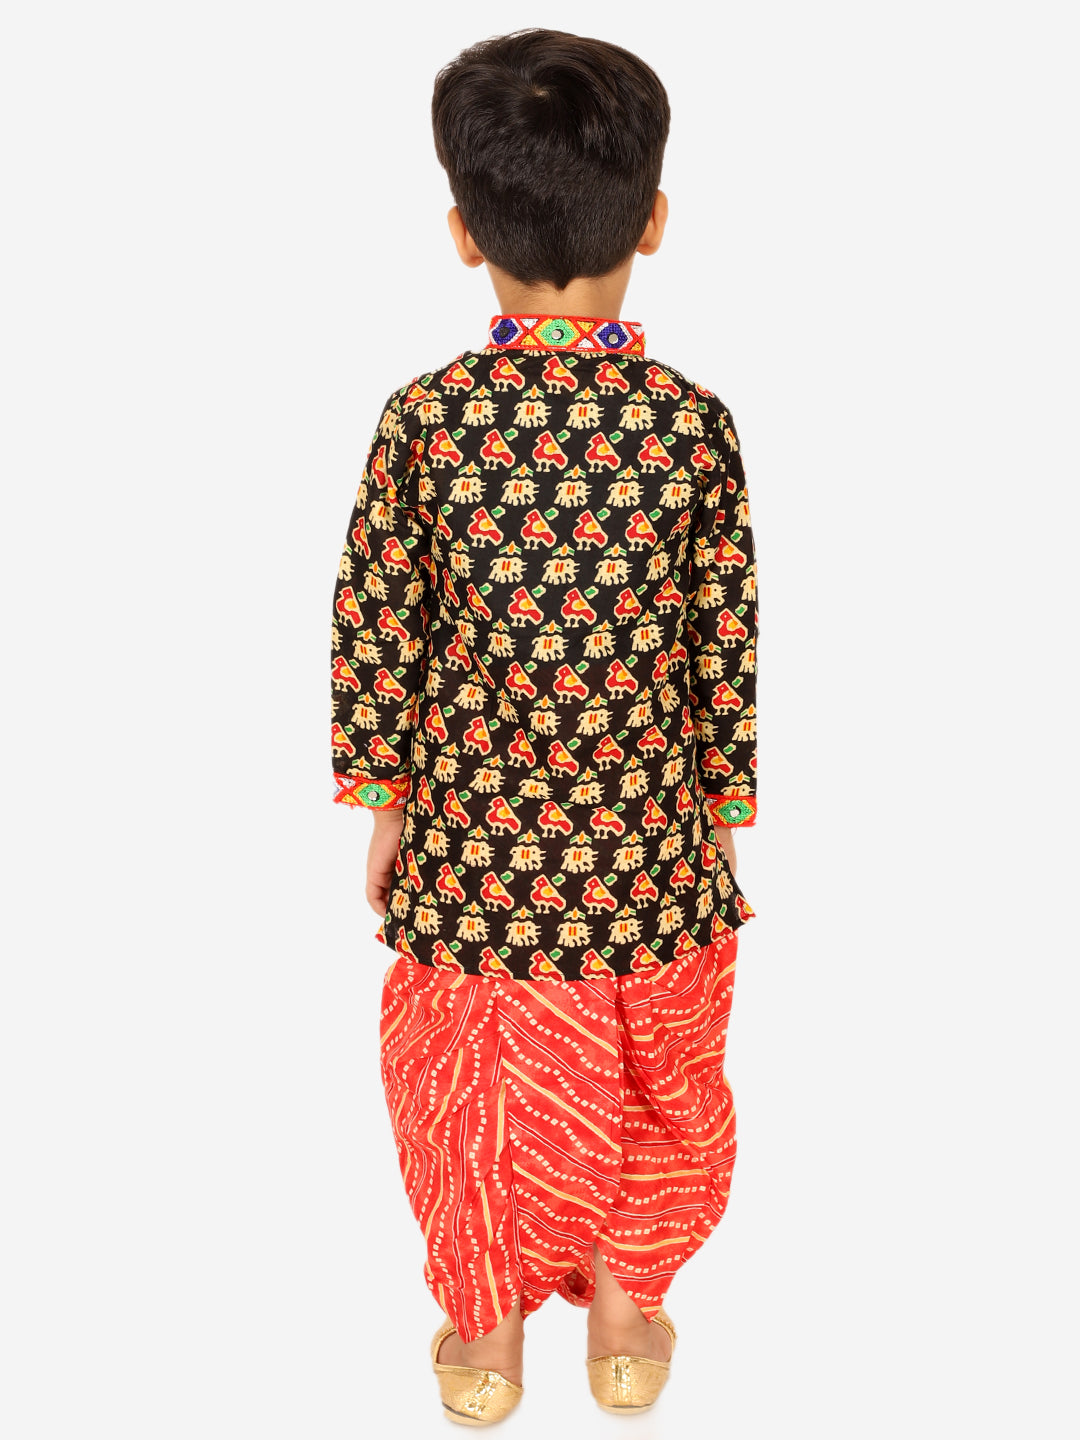 BownBee Printed Cotton Kurta with Dhoti for Boys and Halter Neck Printed Cotton Choli With Dhoti for Girls-Black